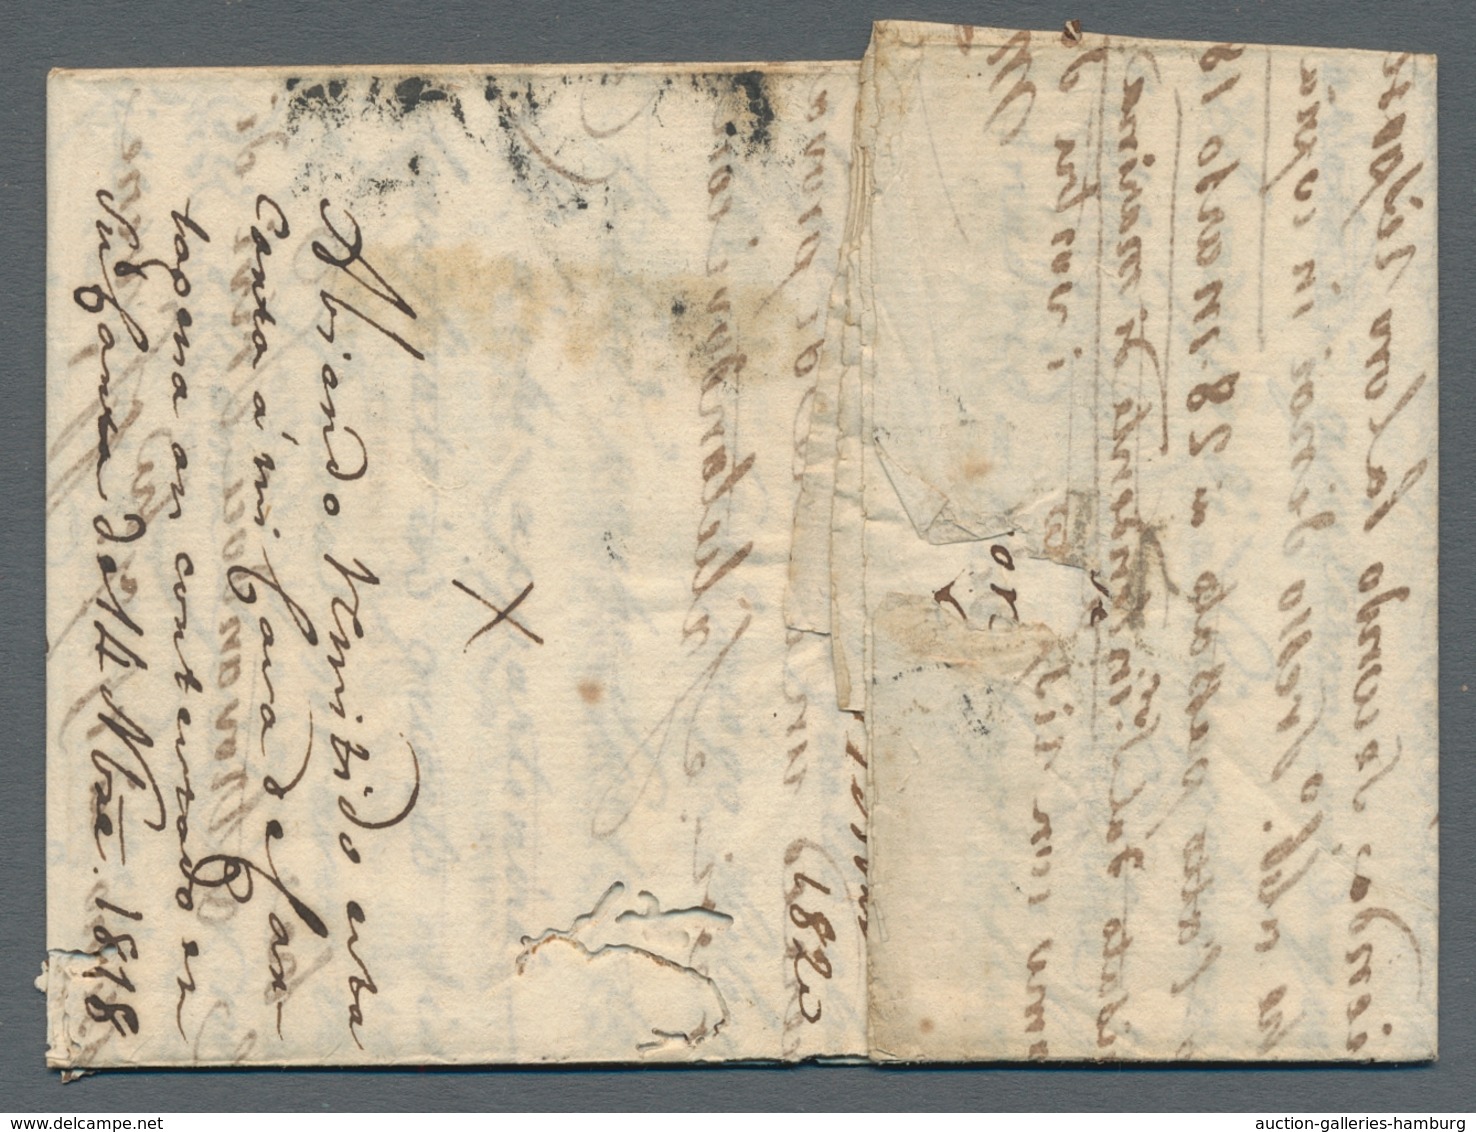 Italien - Vorphilatelie: 1818-1855, small lot of five pre-philatelic or stampless letters from Itall